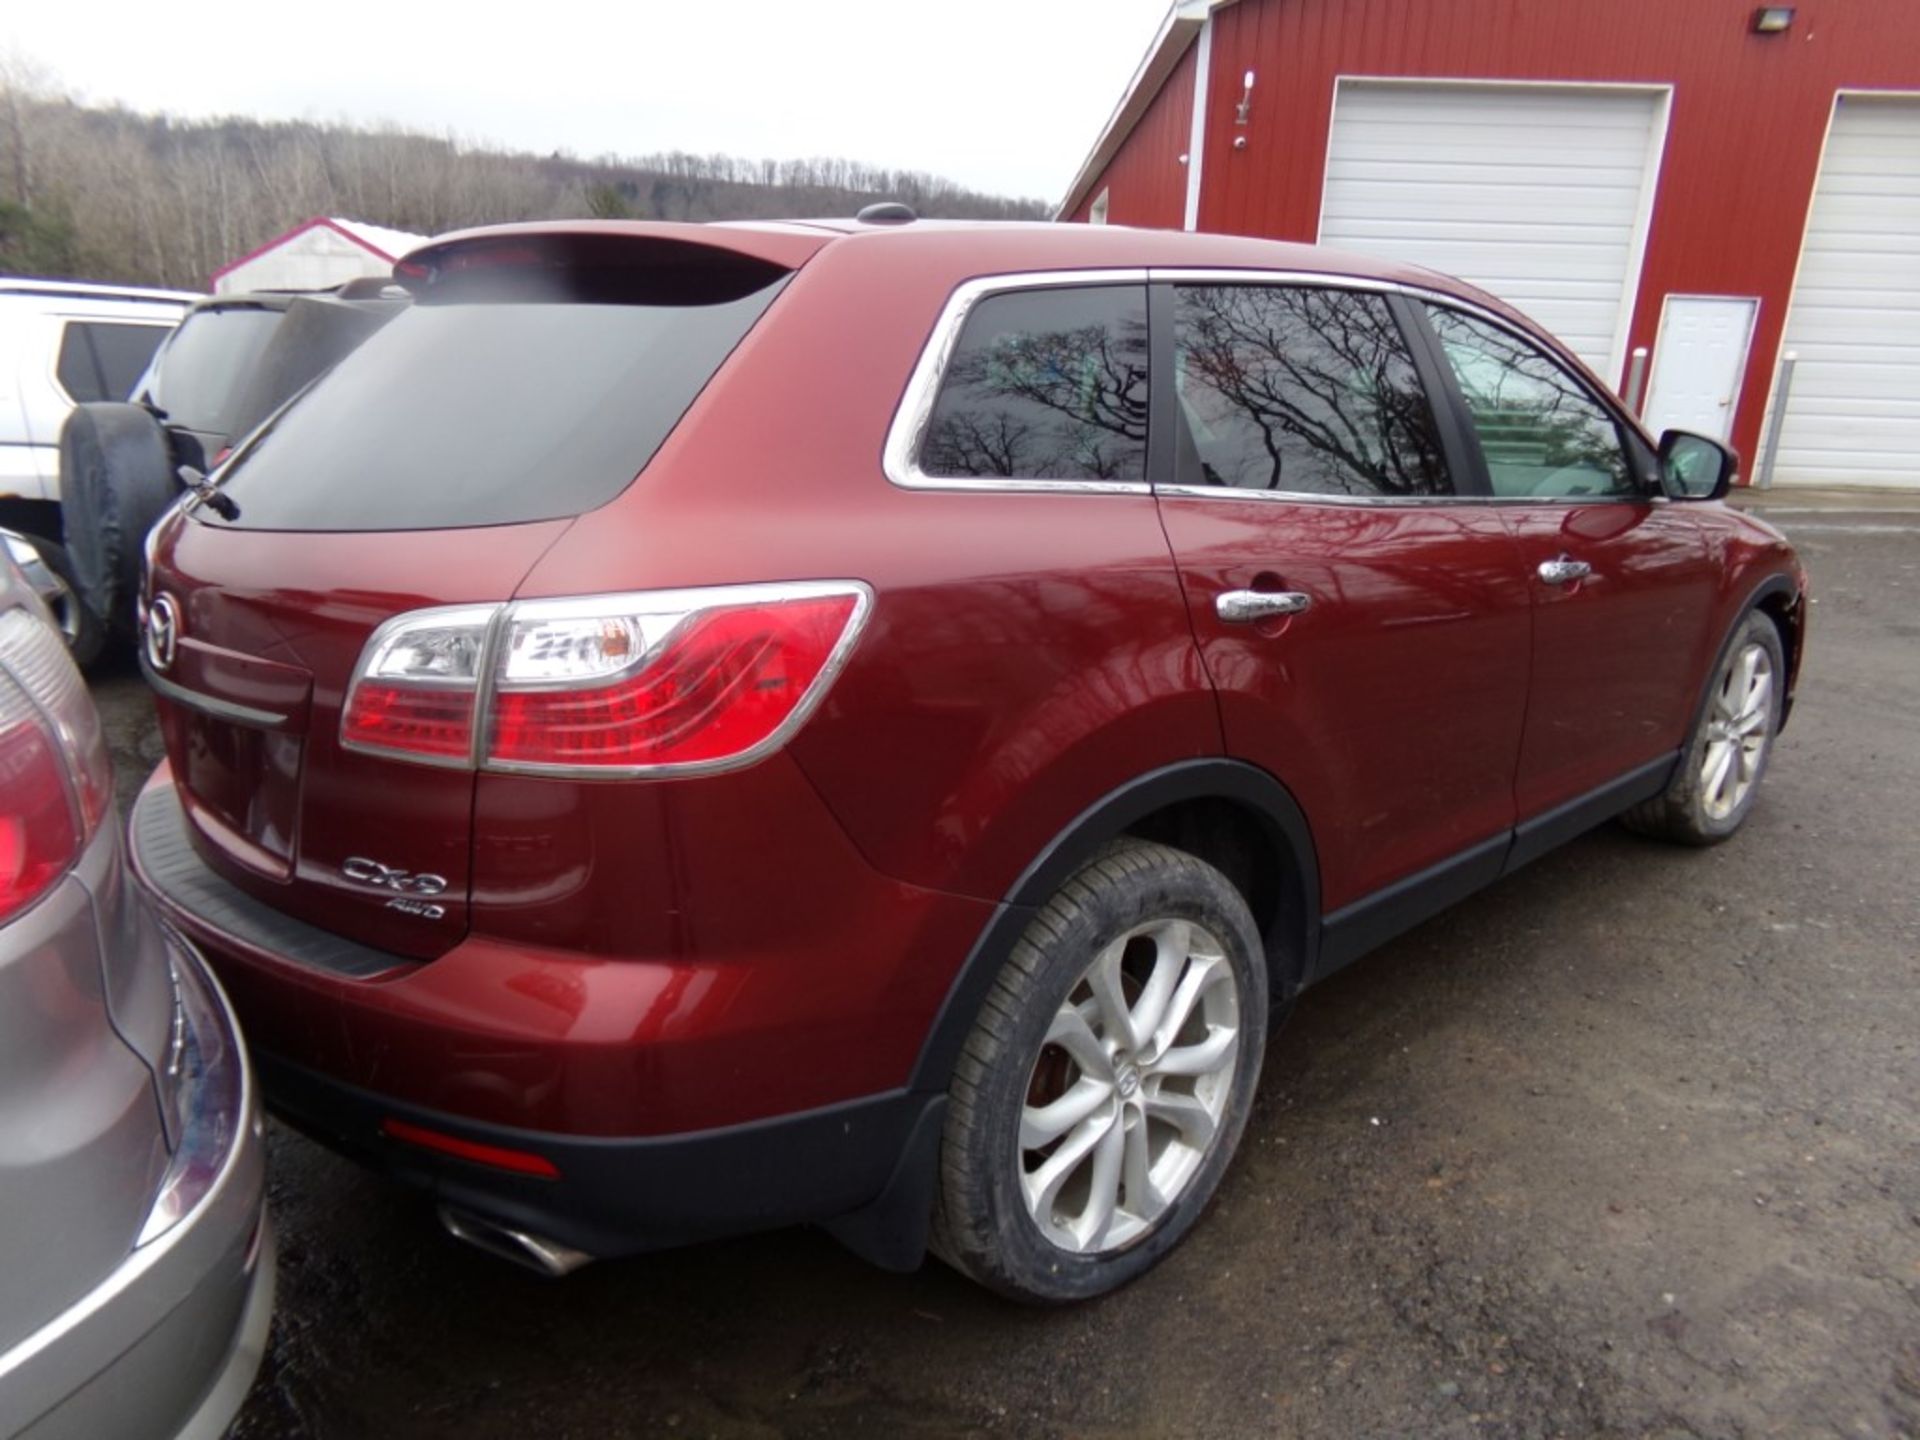 2011 Mazda CX9, AWD, Auto, Maroon, Heated Leather Seats, Sunroof, Navigation, Has New Tires, - Image 3 of 8